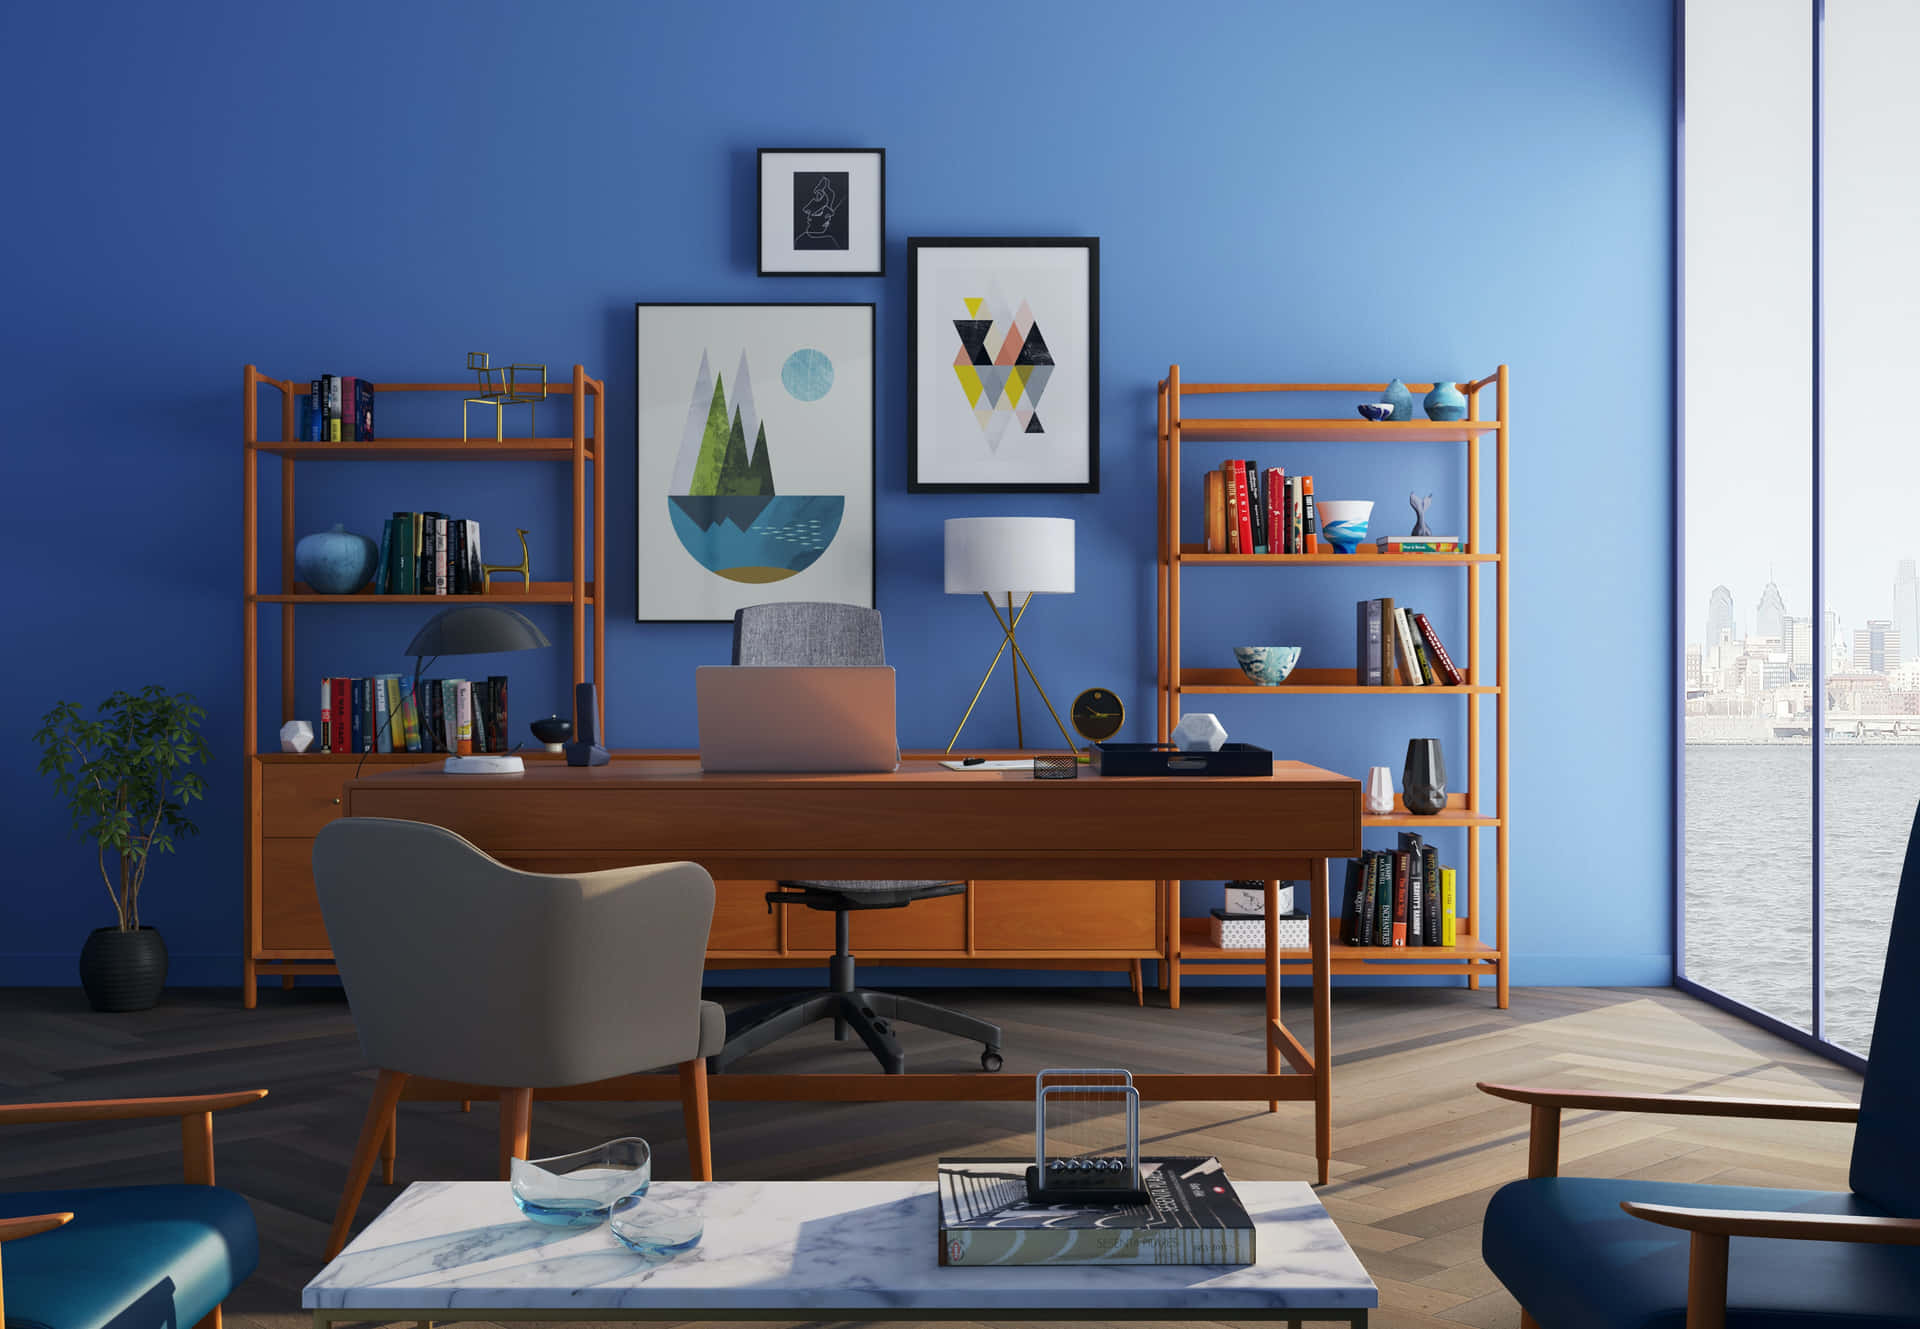 Creating a Professional Space in your Home Office